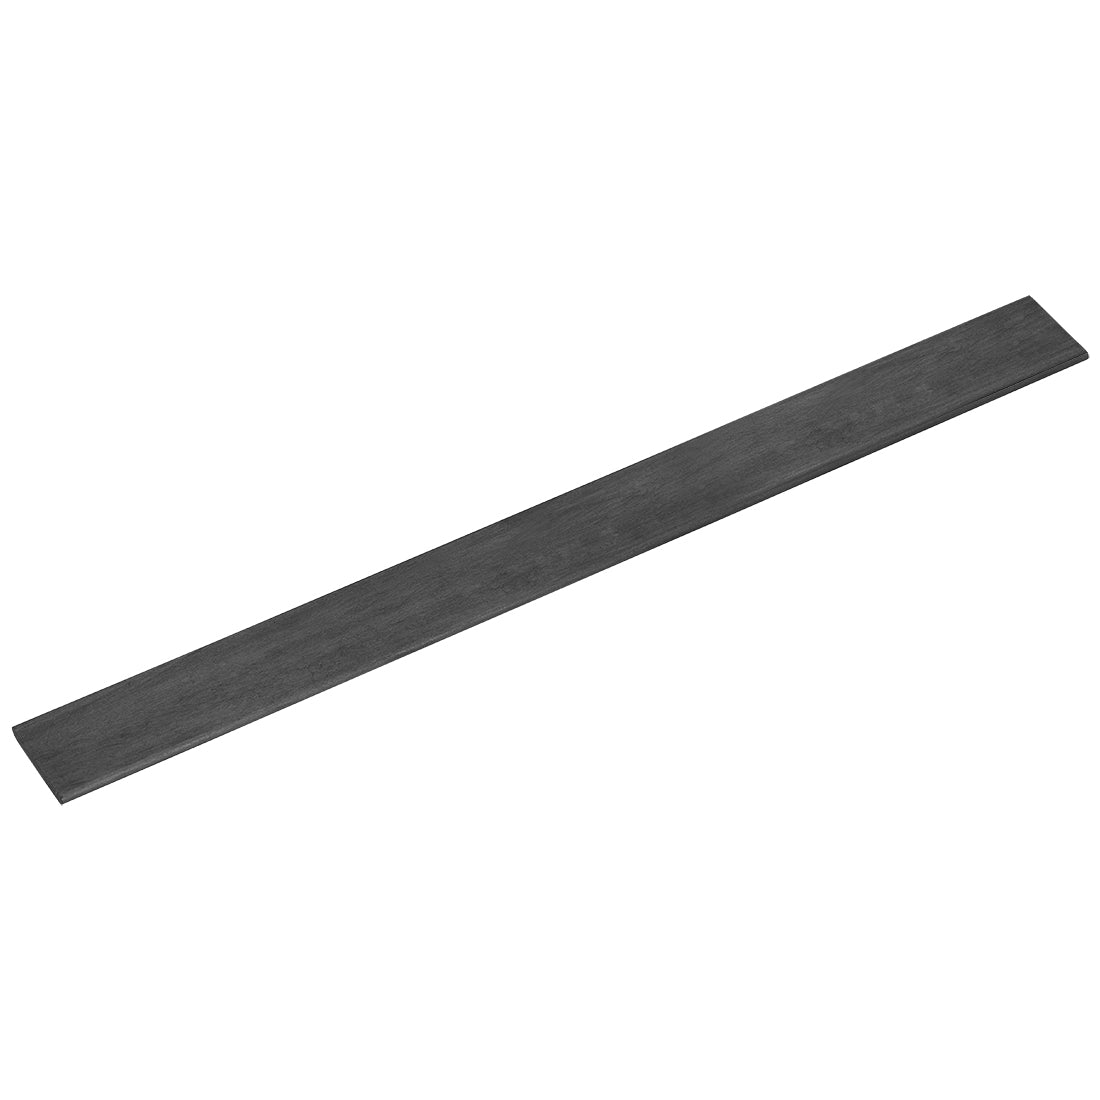 uxcell Uxcell Carbon Fiber Strip Bars 2x19mm 400mm Length Pultruded Carbon Fiber Strips for Kites, RC Airplane 1 Pcs